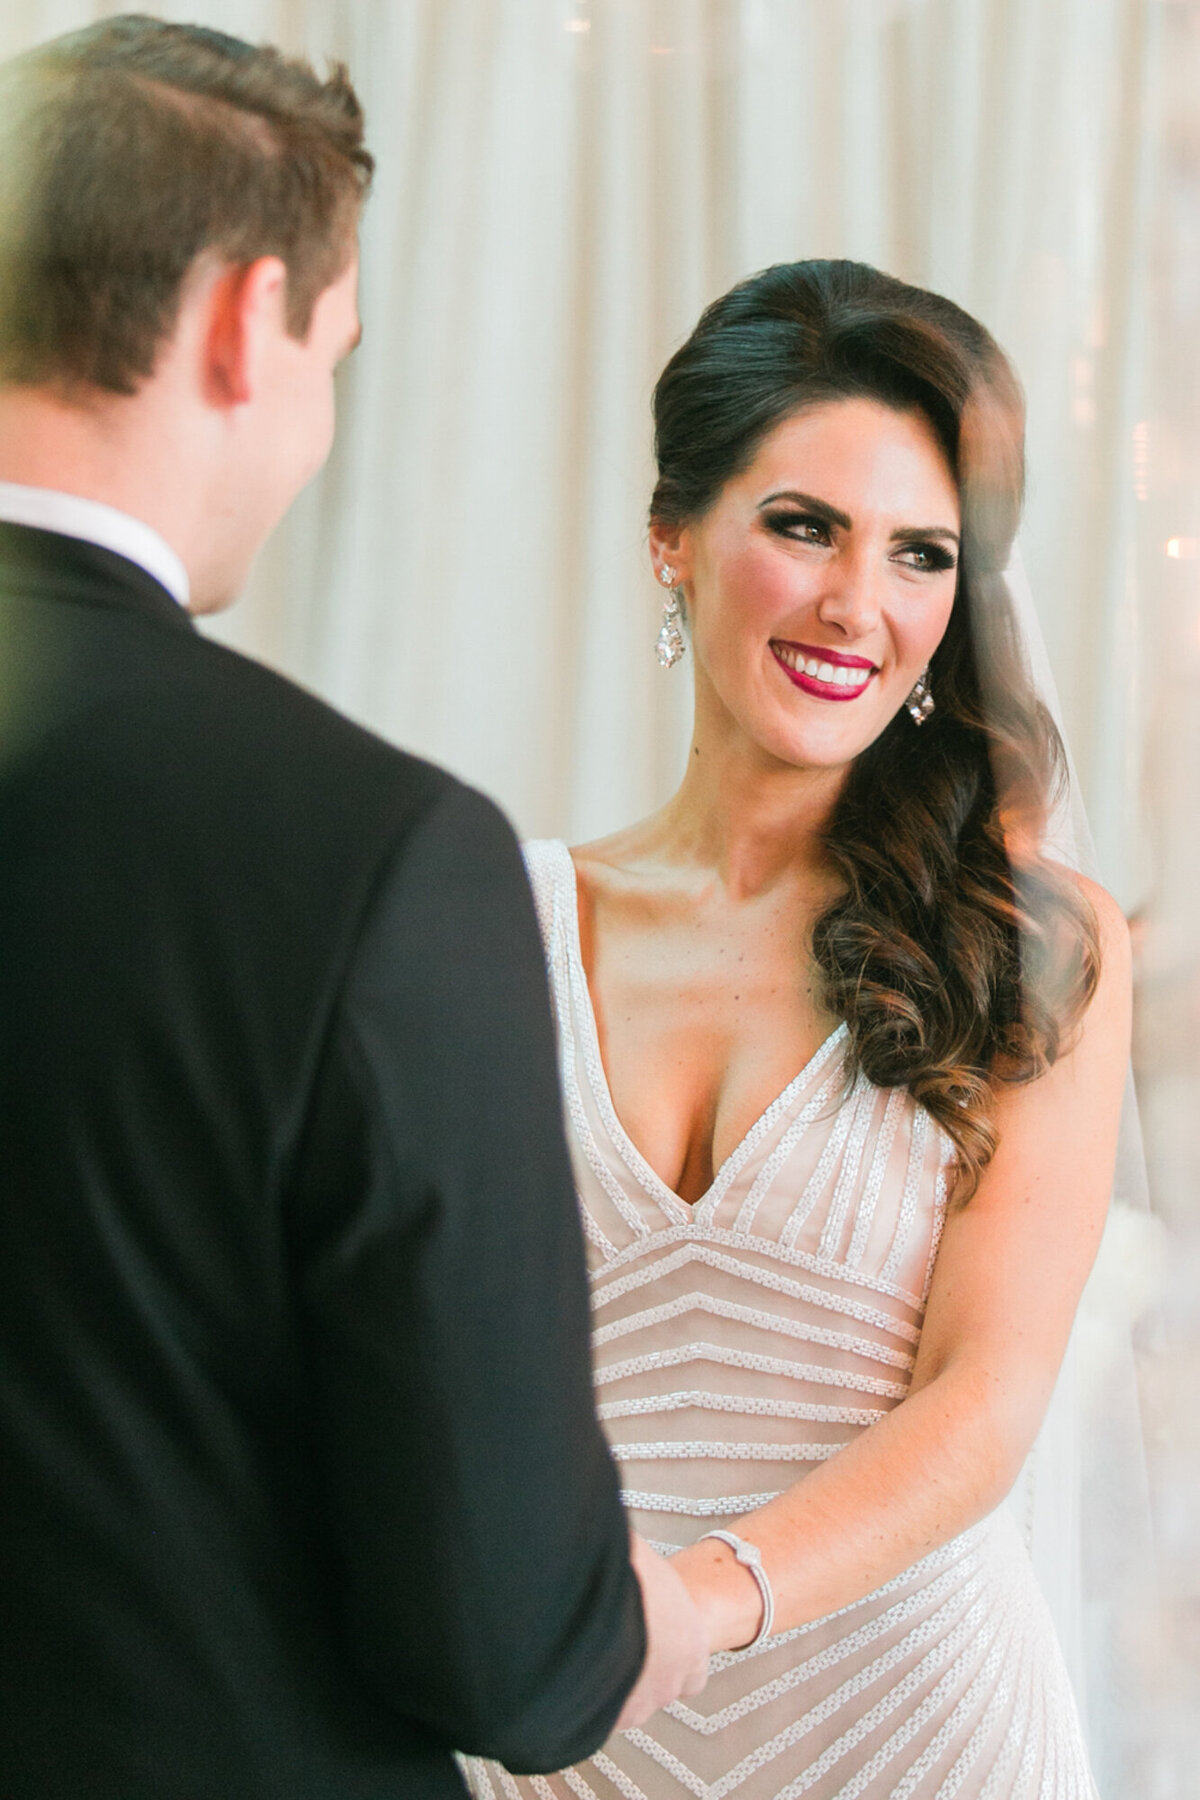 A candid moment of a bride during her wedding ceremony at Cafe Brauer in Chicago